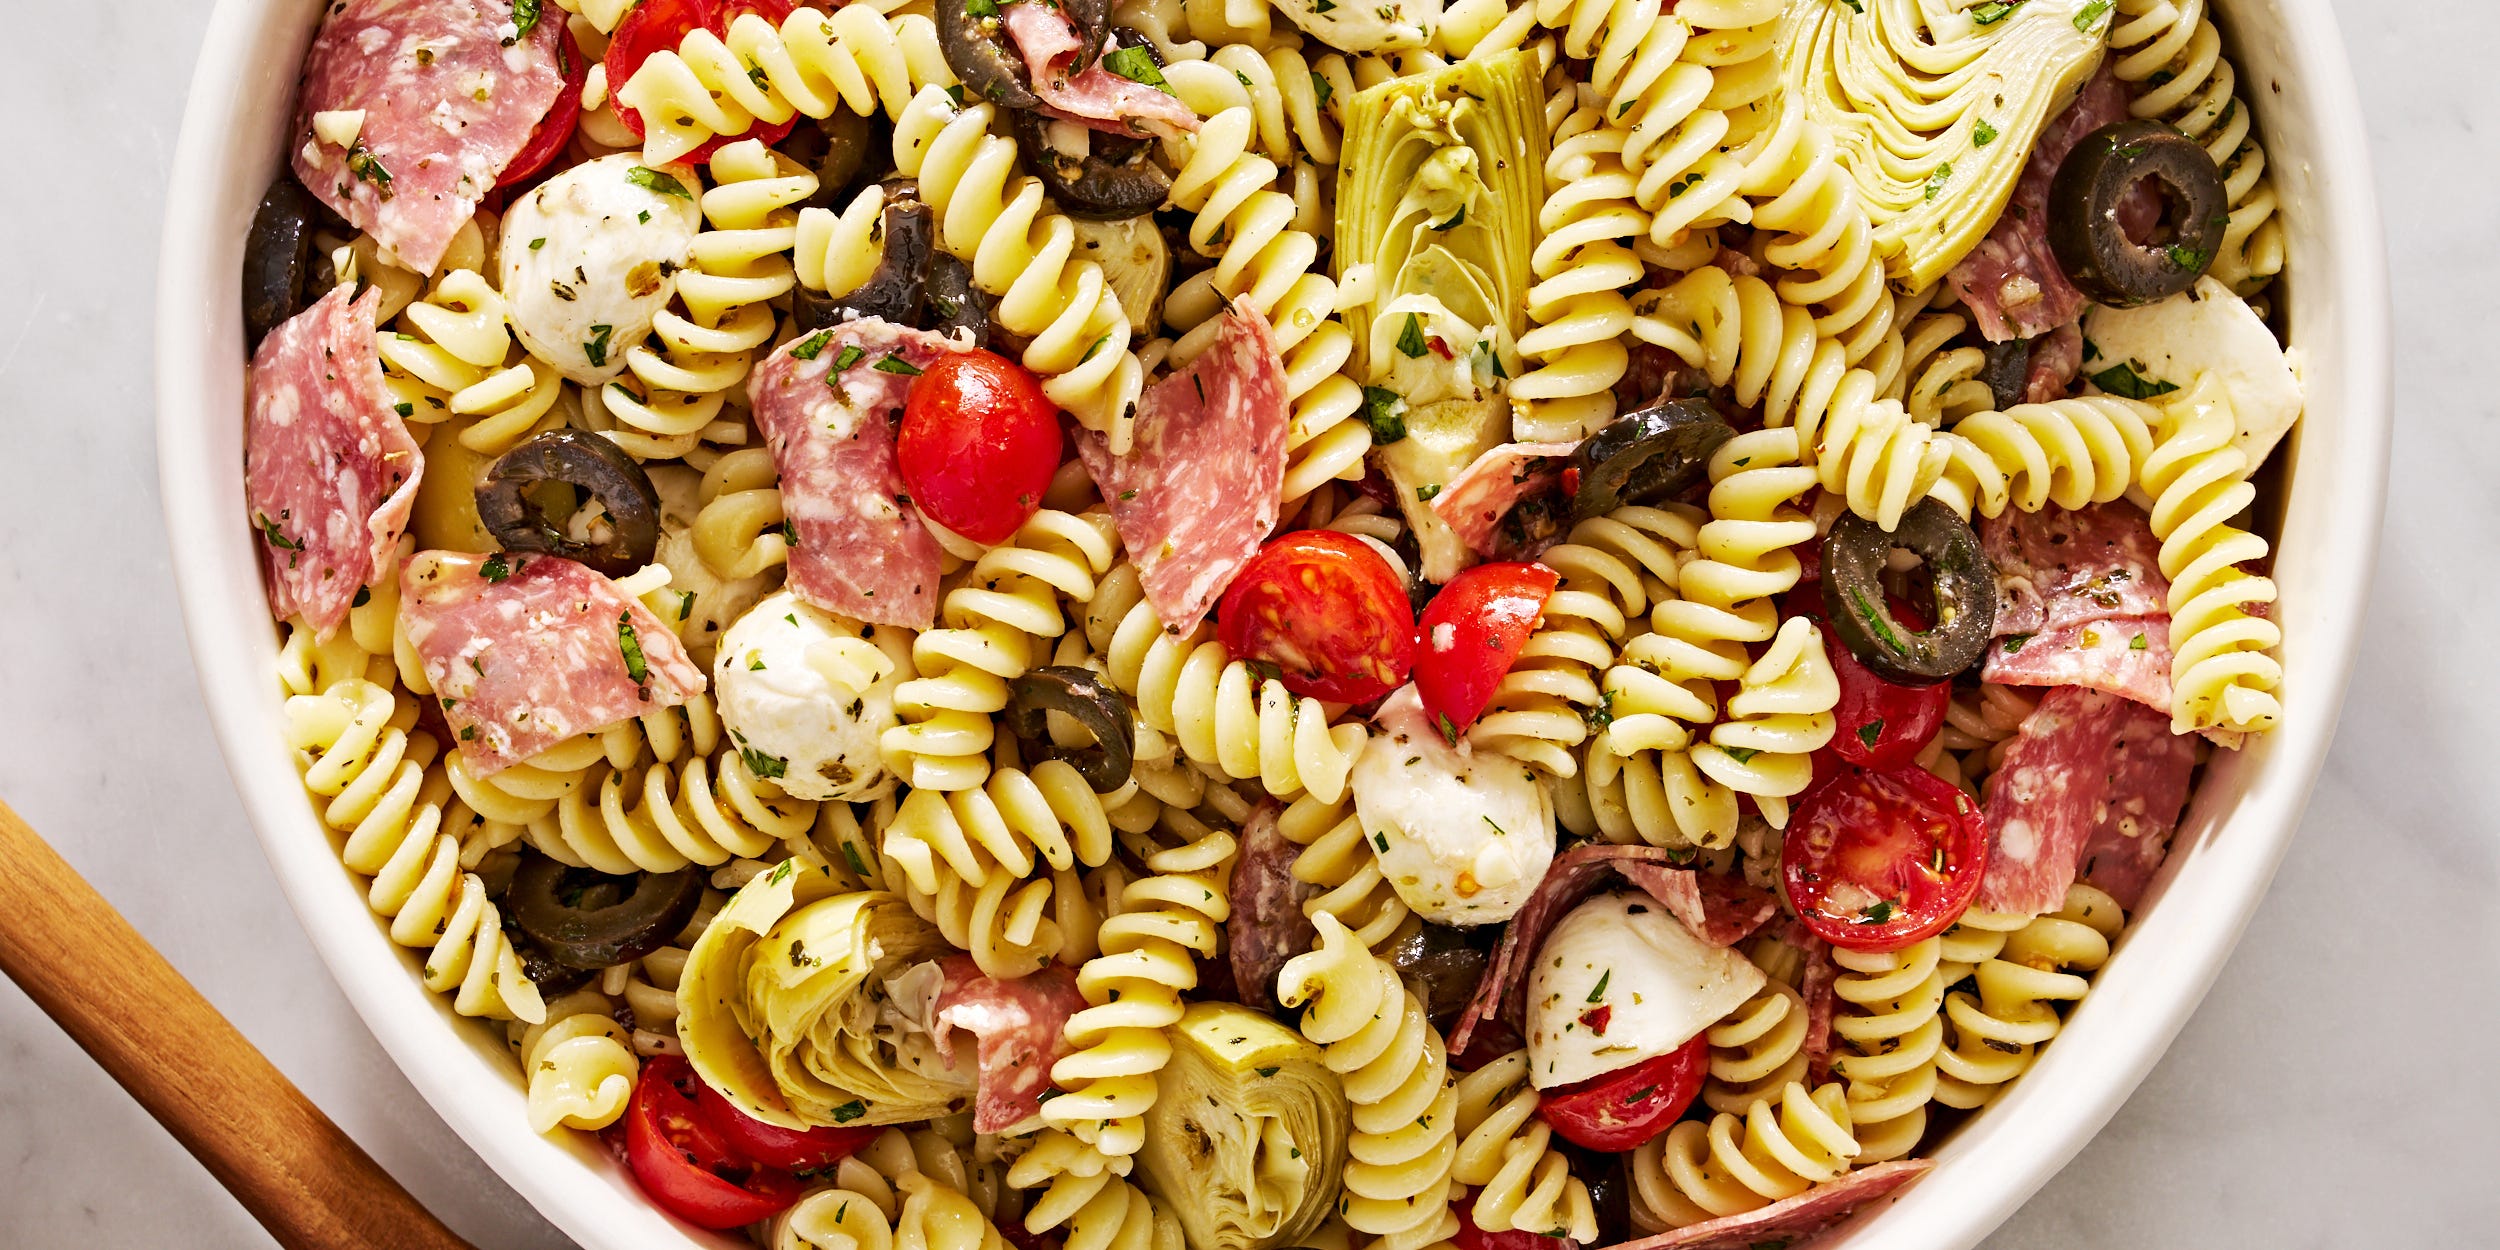 PSA: This Loaded Italian Pasta Salad Is Better Than Any Creamy Version